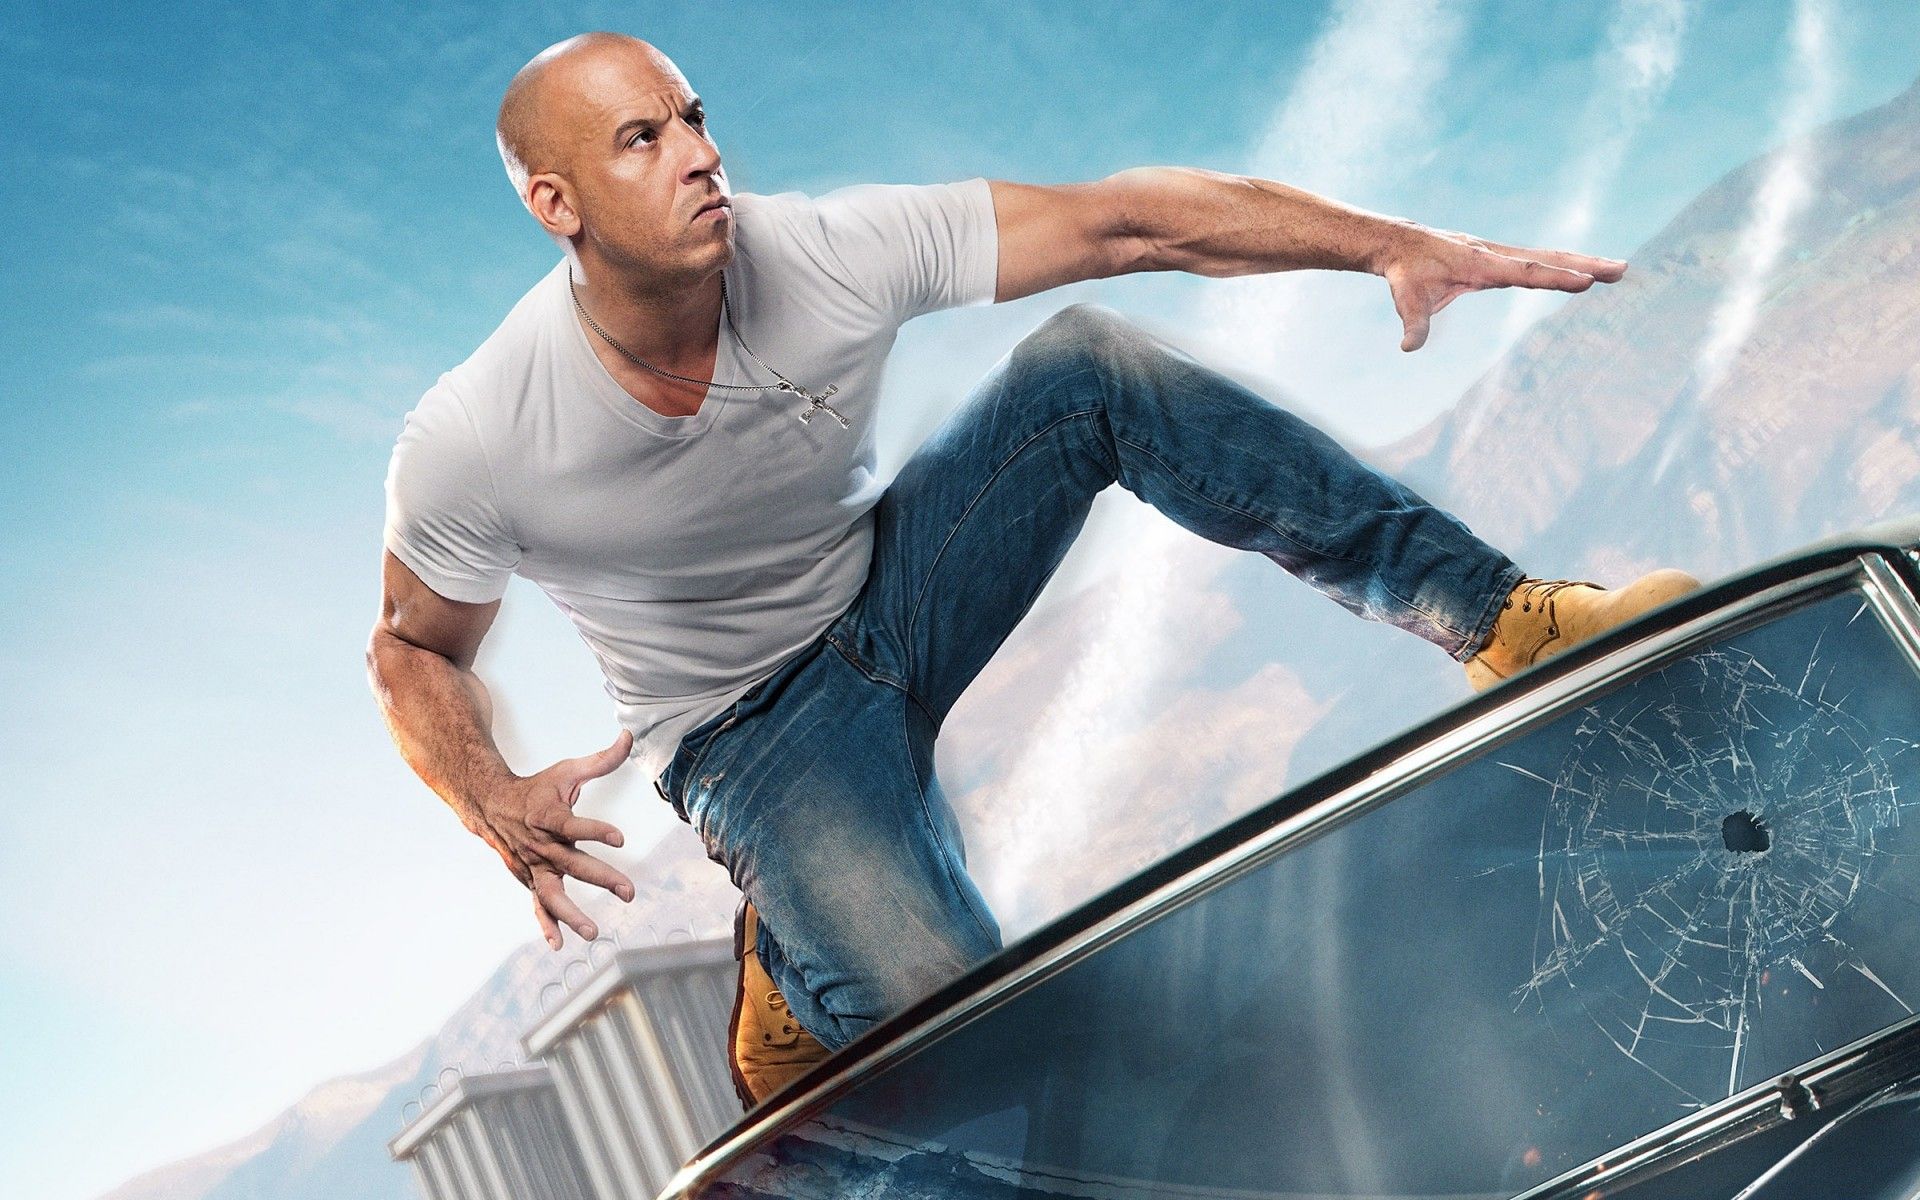 Men Actor Jeans Vin Diesel Fast And Furious T Shirt Bald Head Broken Glass Angry Cabrio Boots Movies Wallpaper:1920x1200